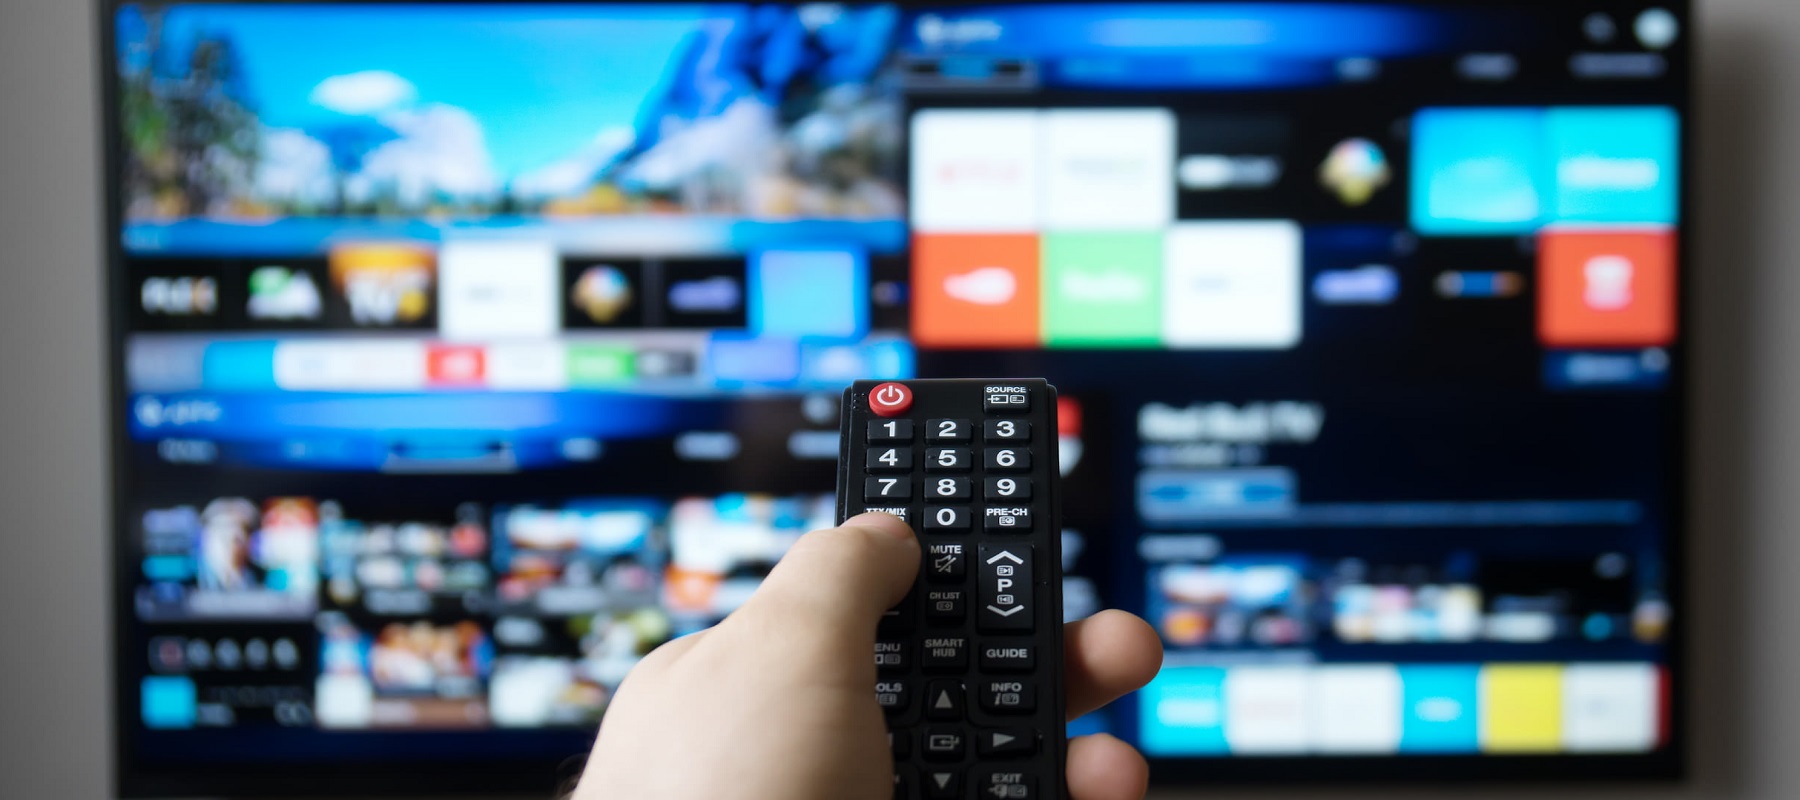 Connected TV accounts for half of global video impression share for retail advertisers, study